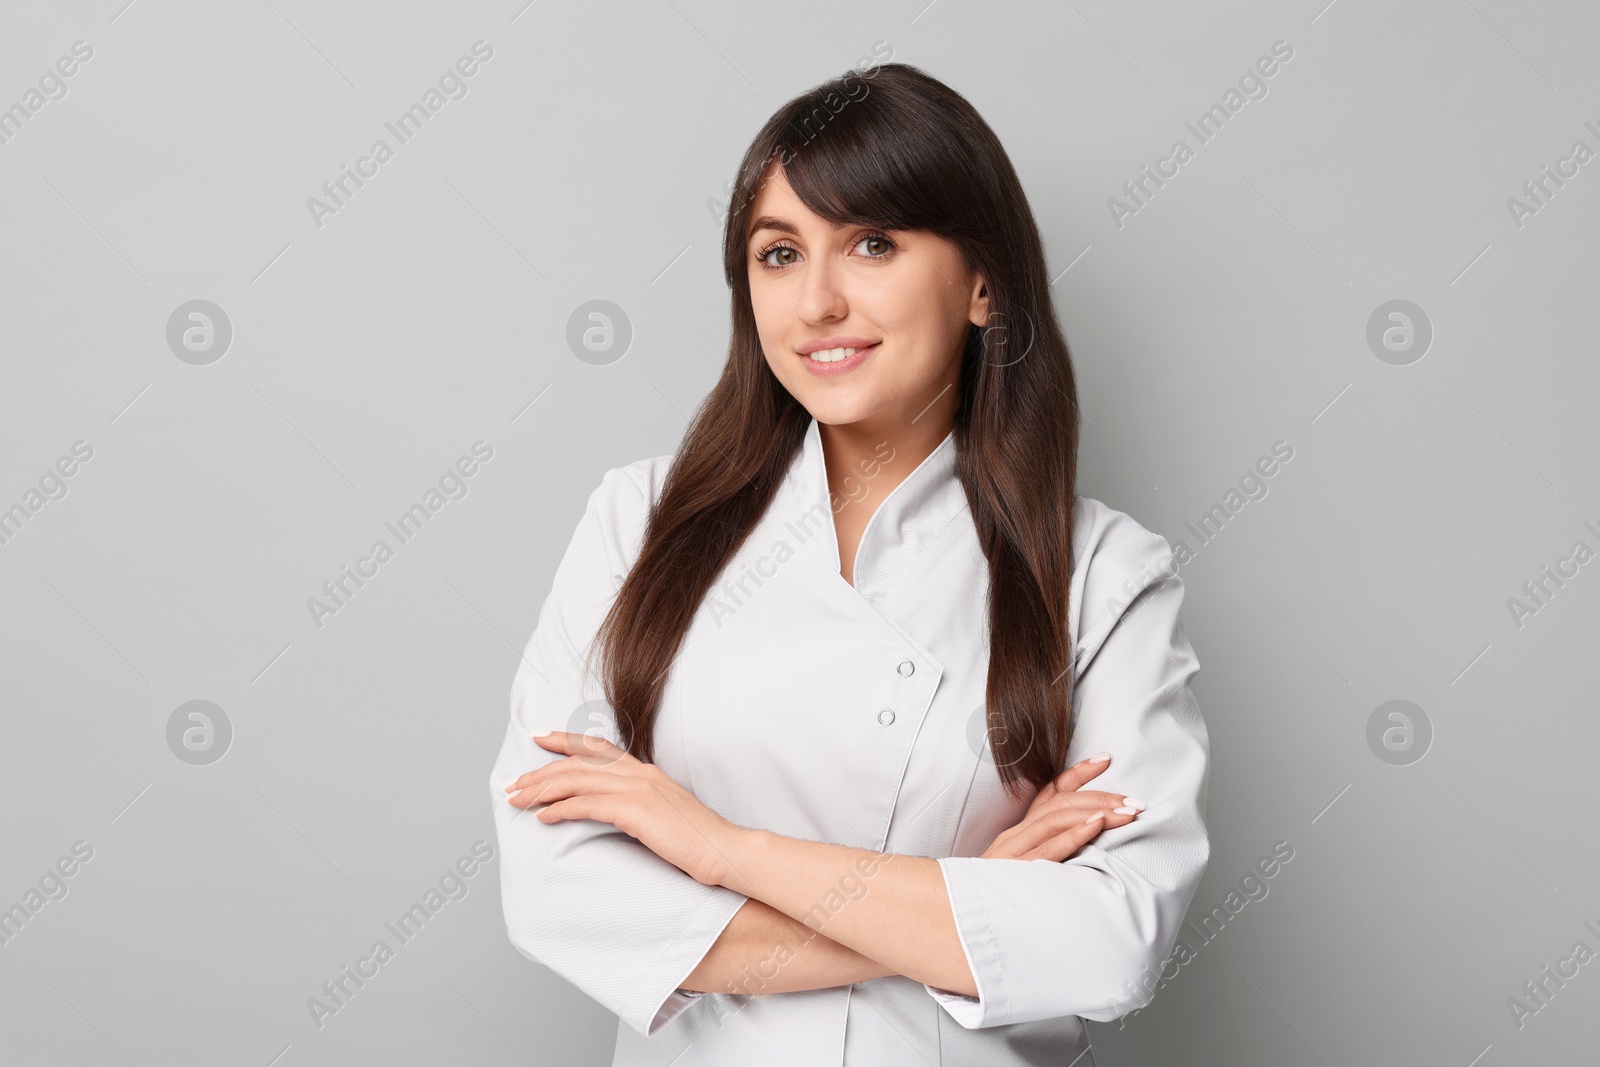 Photo of Cosmetologist in medical uniform on grey background